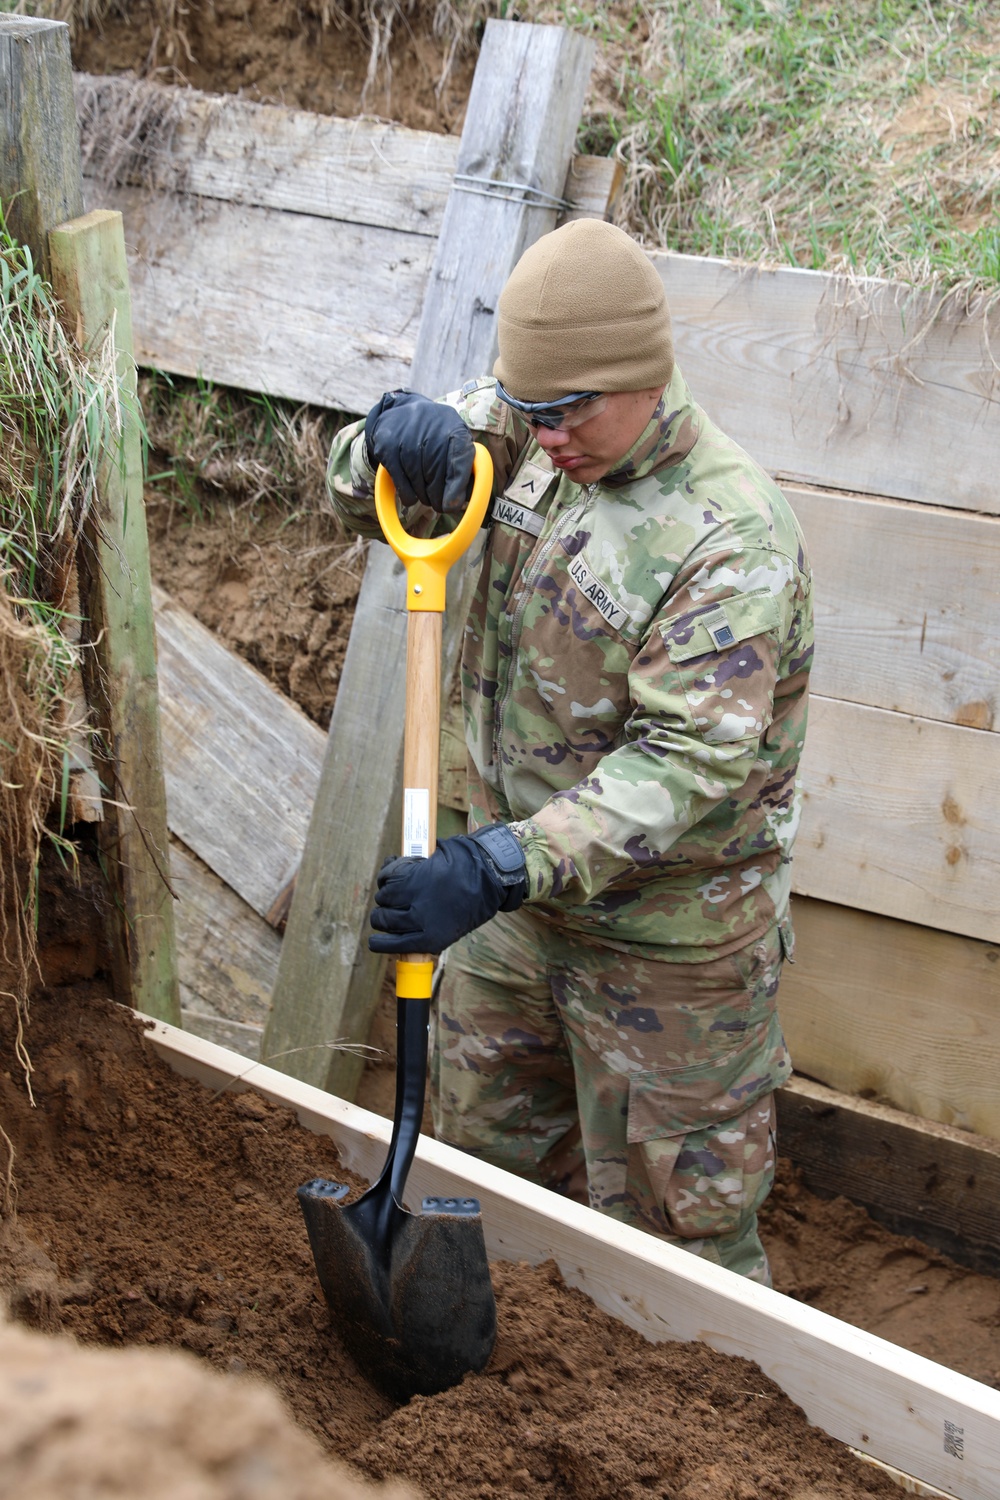 Engineers build and maintain trenches in Bemowo Piskie Training Area